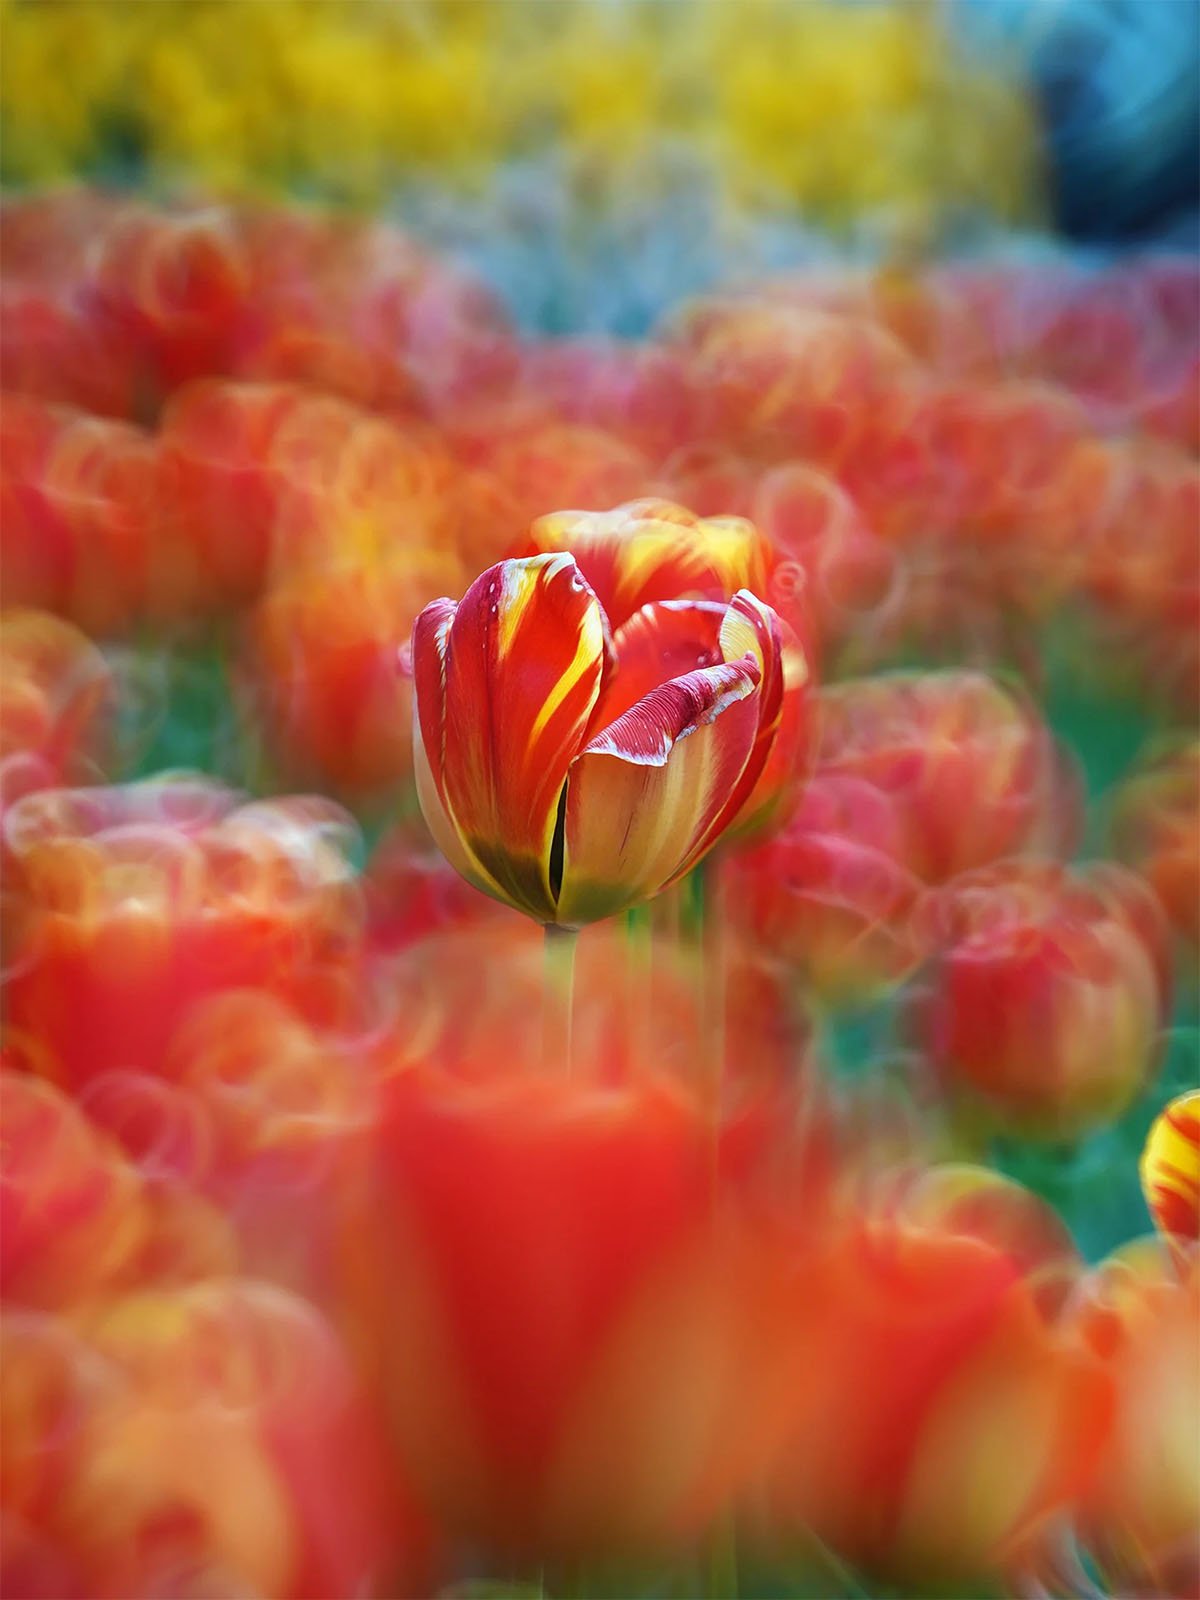 A single, vibrant red and yellow tulip stands out sharply in the foreground against a dreamy background of blurred, colorful tulips in a field, creating a stunning array of reds, yellows, and greens.